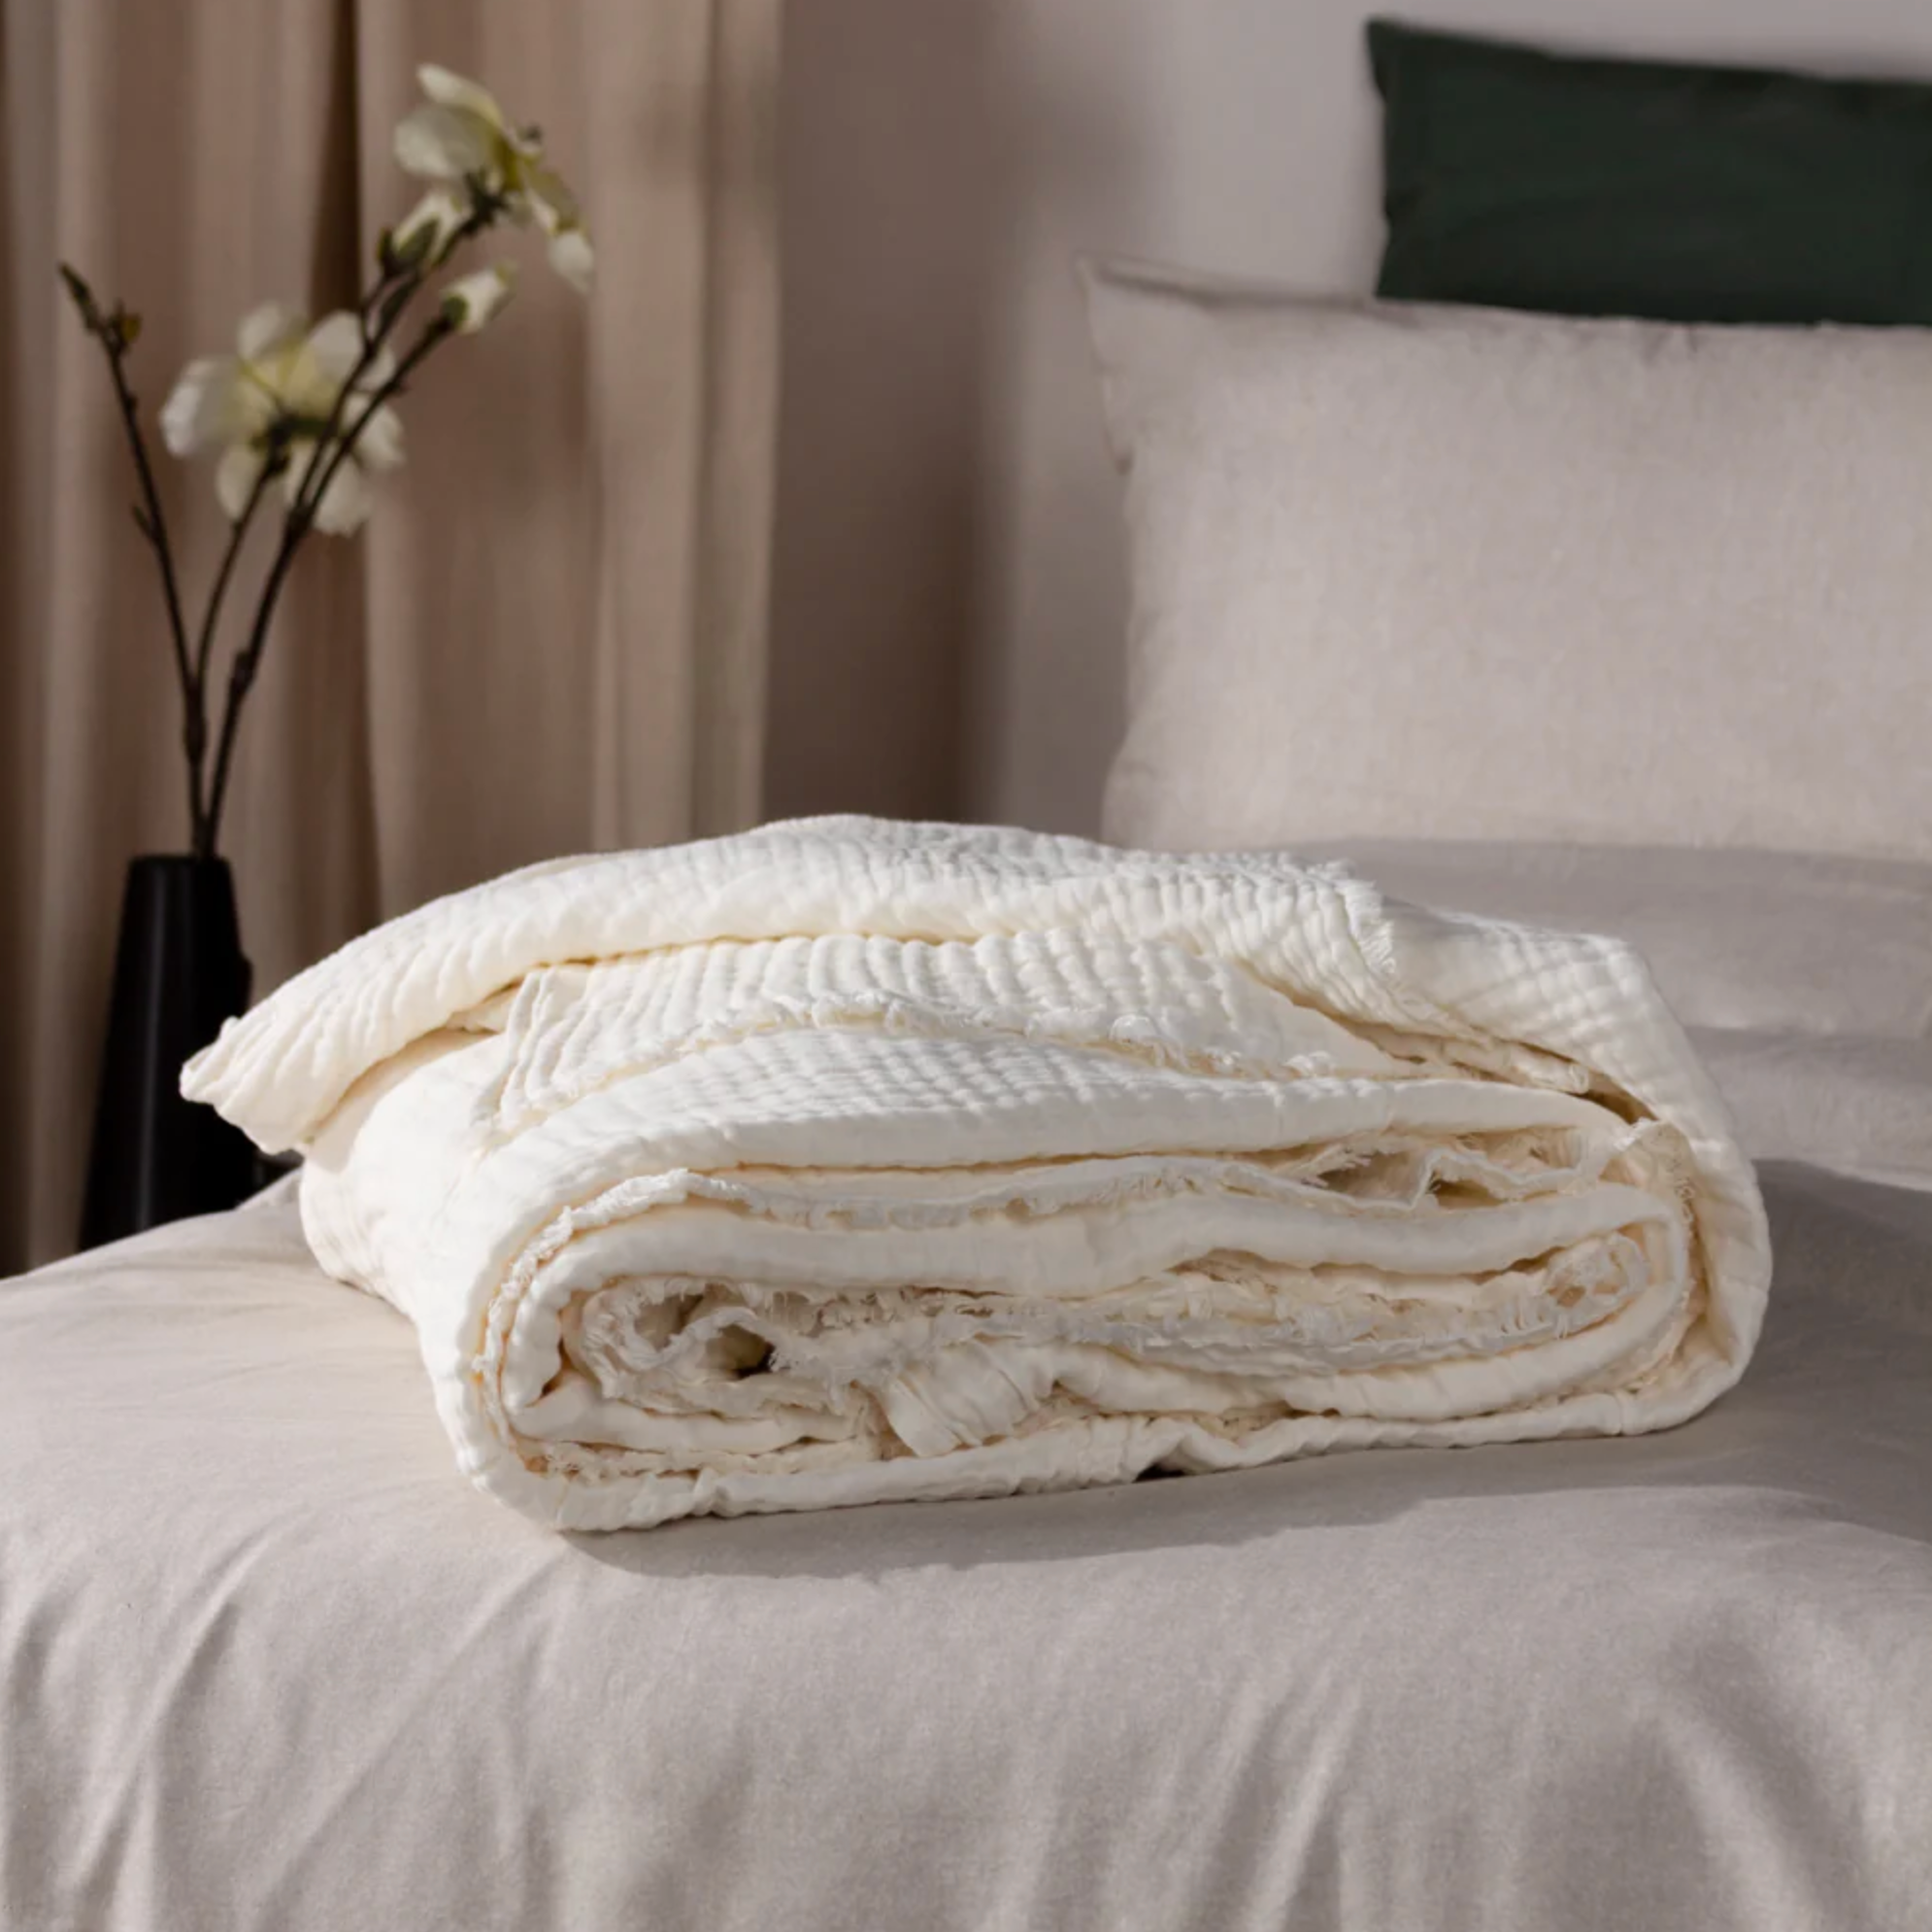 White Muslin Bedspread neatly folded on the end of a bed.